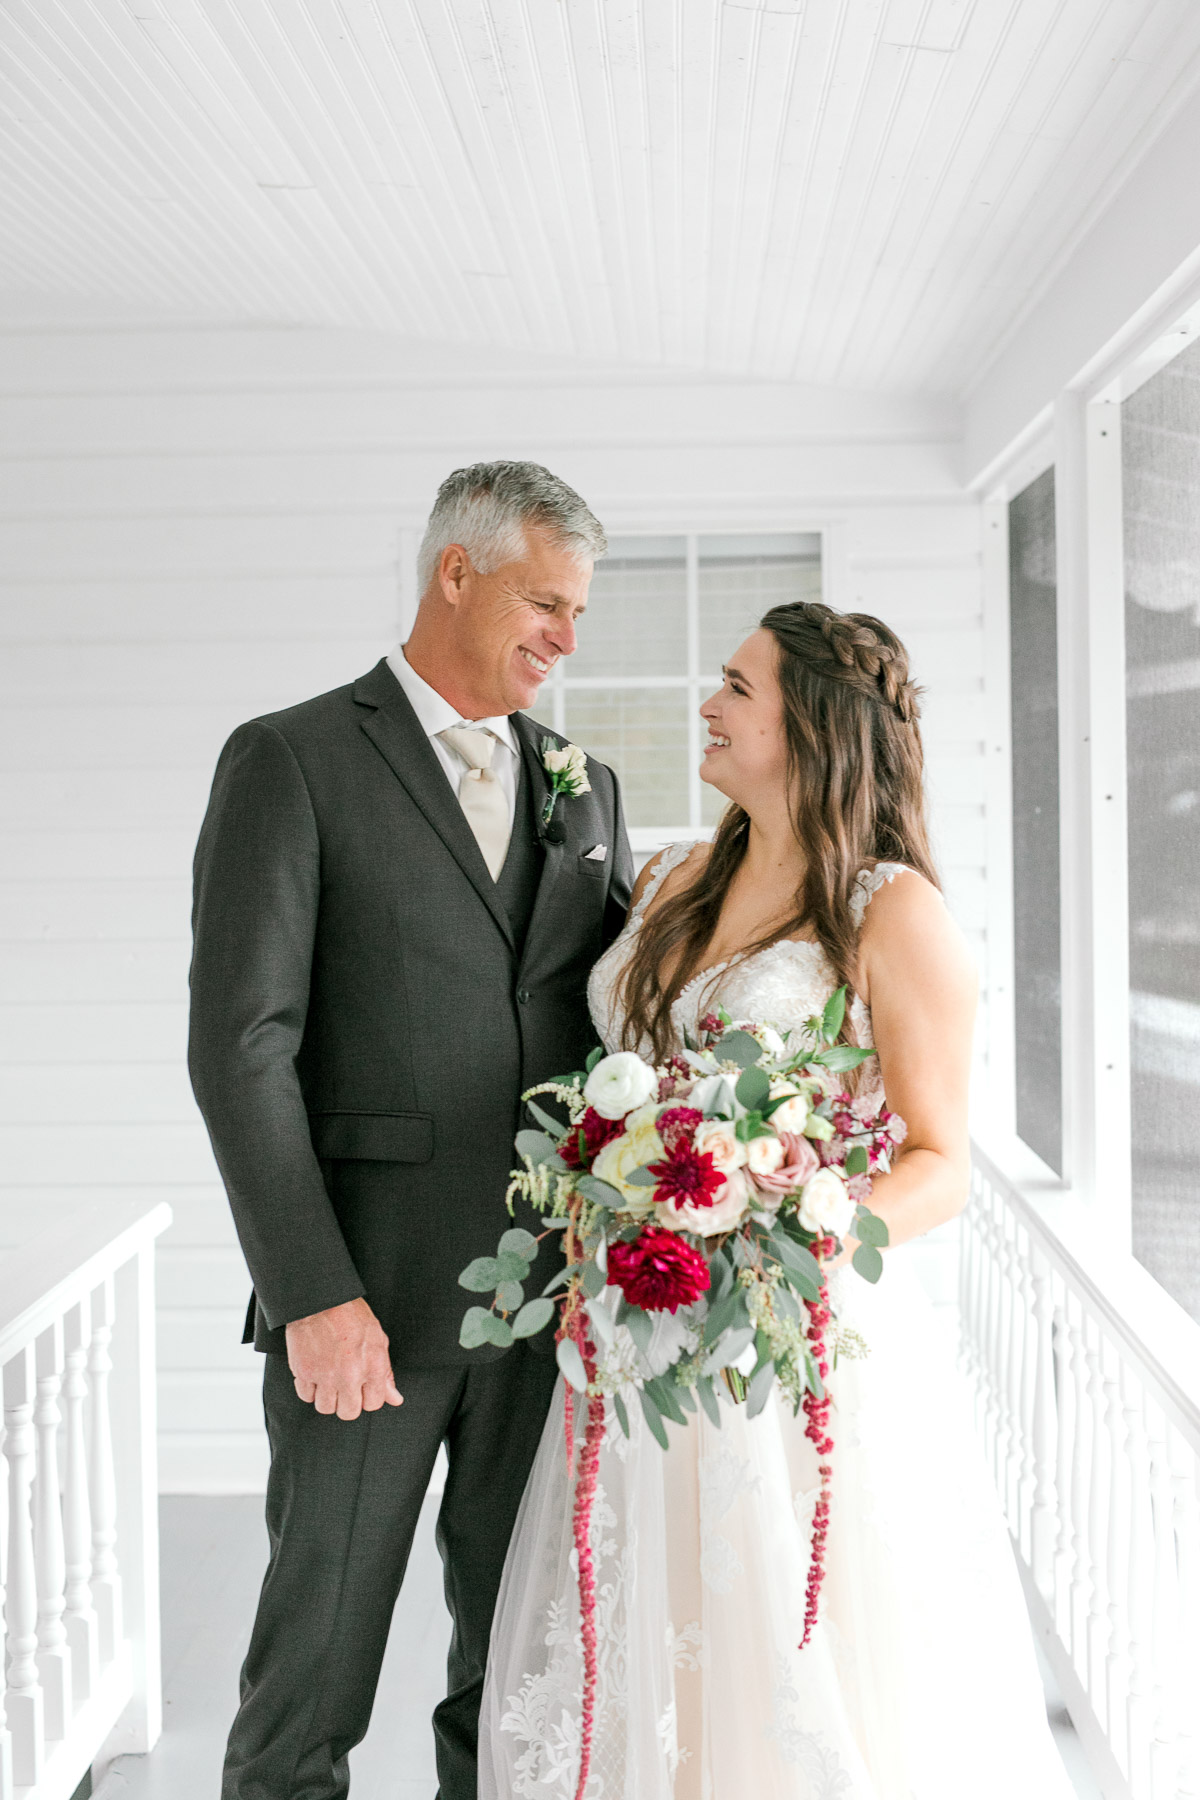 Father and daughter smile at each other at wedding